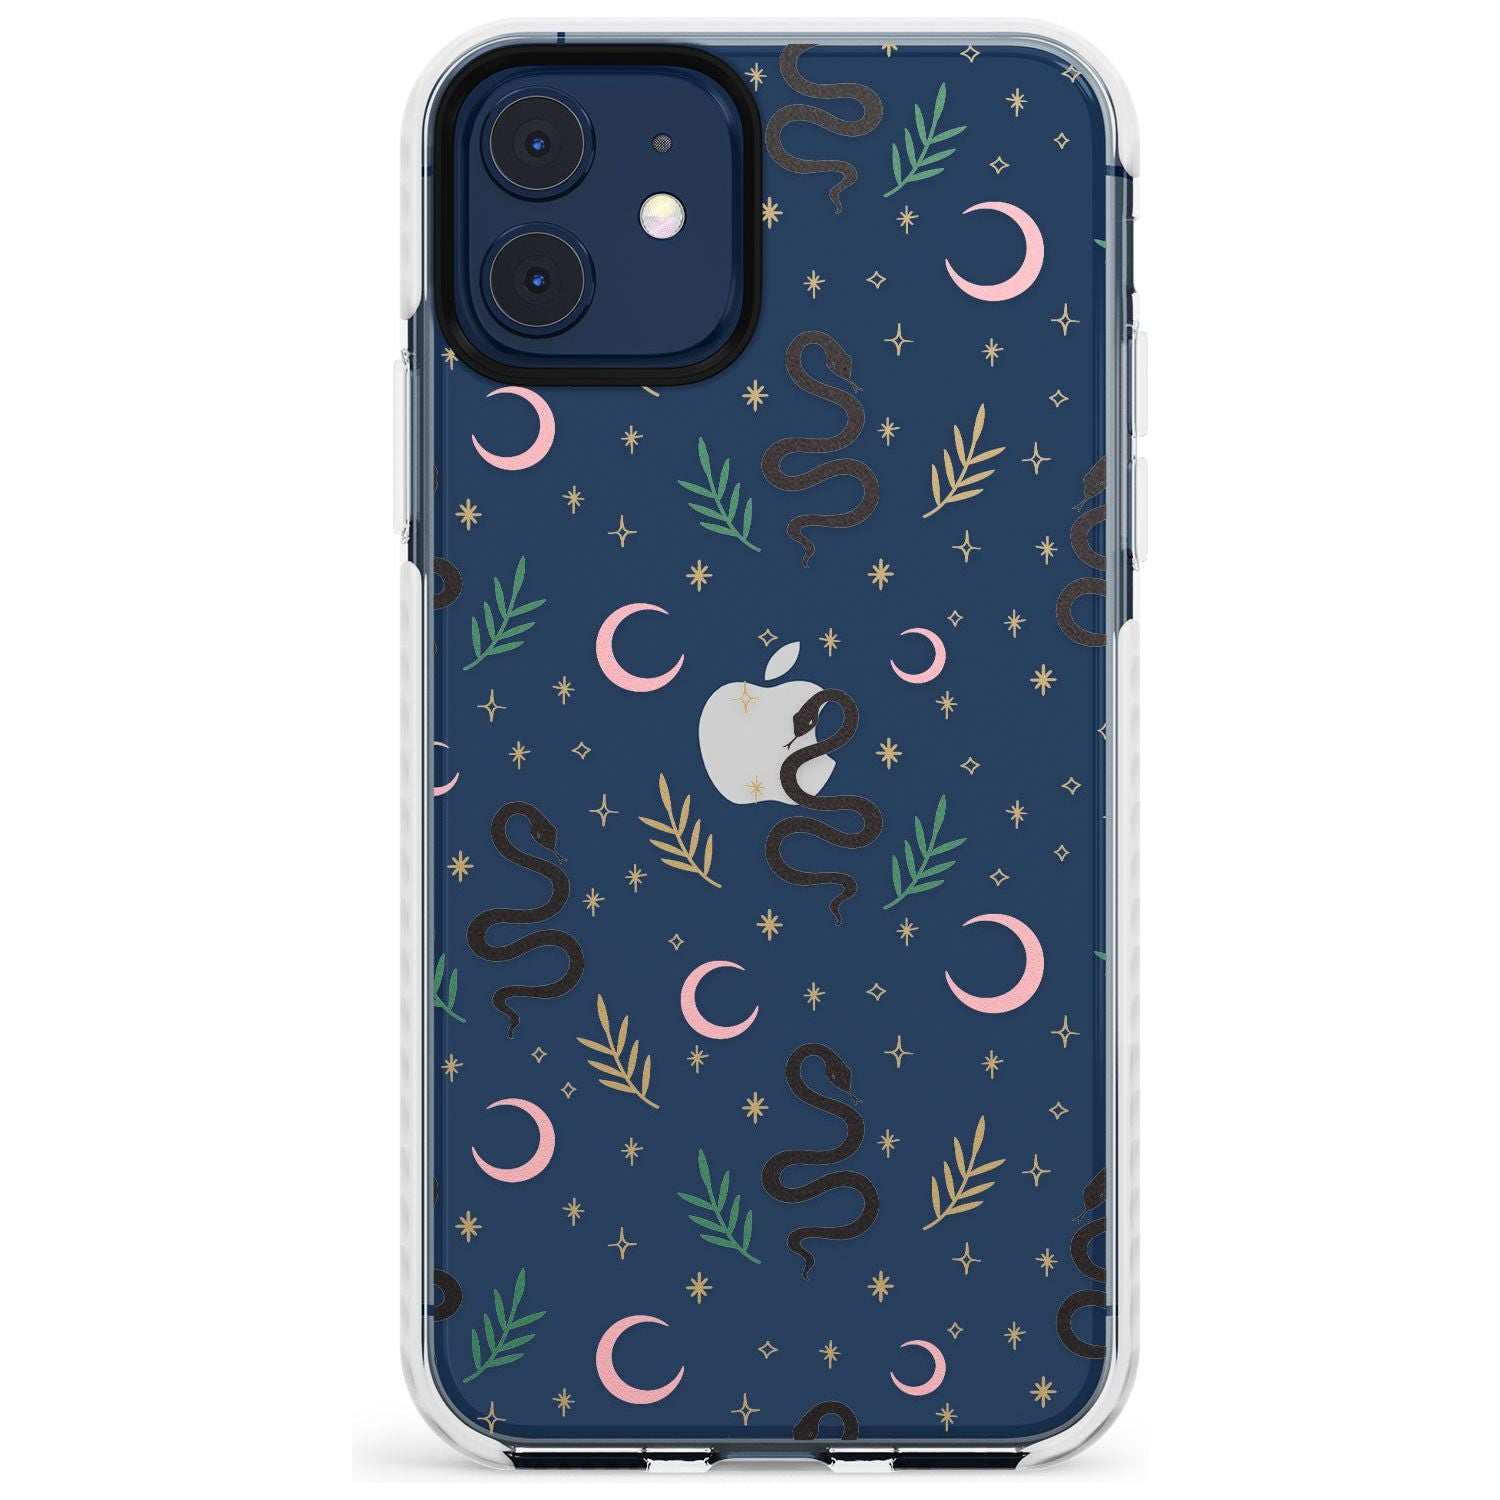 Snake & Moon Pattern (Clear) Slim TPU Phone Case for iPhone 11